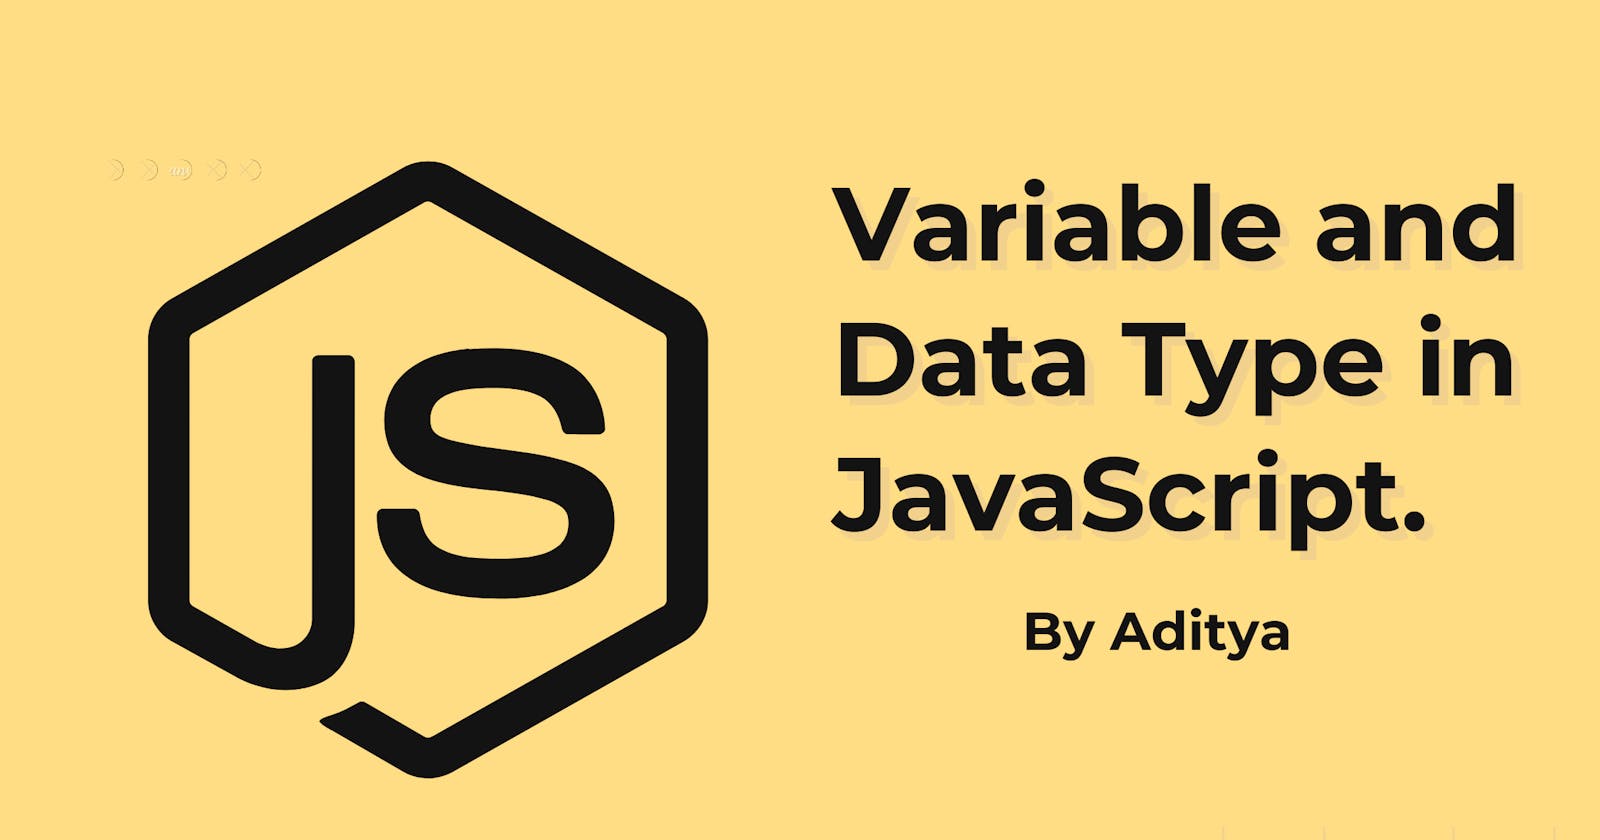 Variable and Data Type in JavaScript.